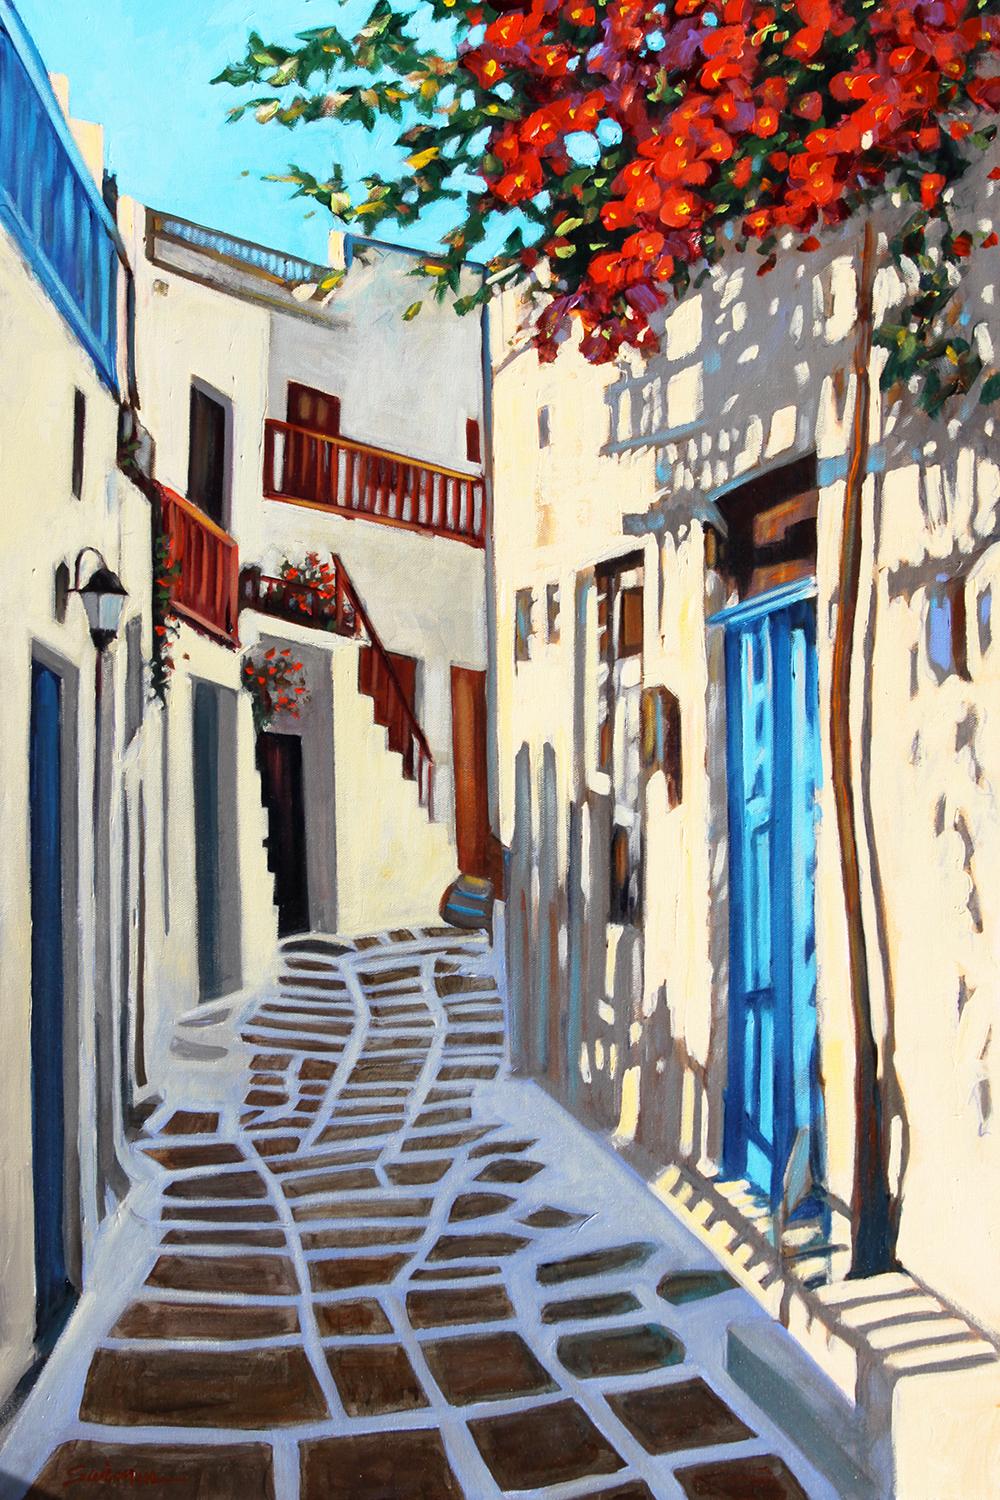 Tom Swimm Landscape Painting - "Colors of Mykonos, " Street Scene with Red Flowers and Blue Door